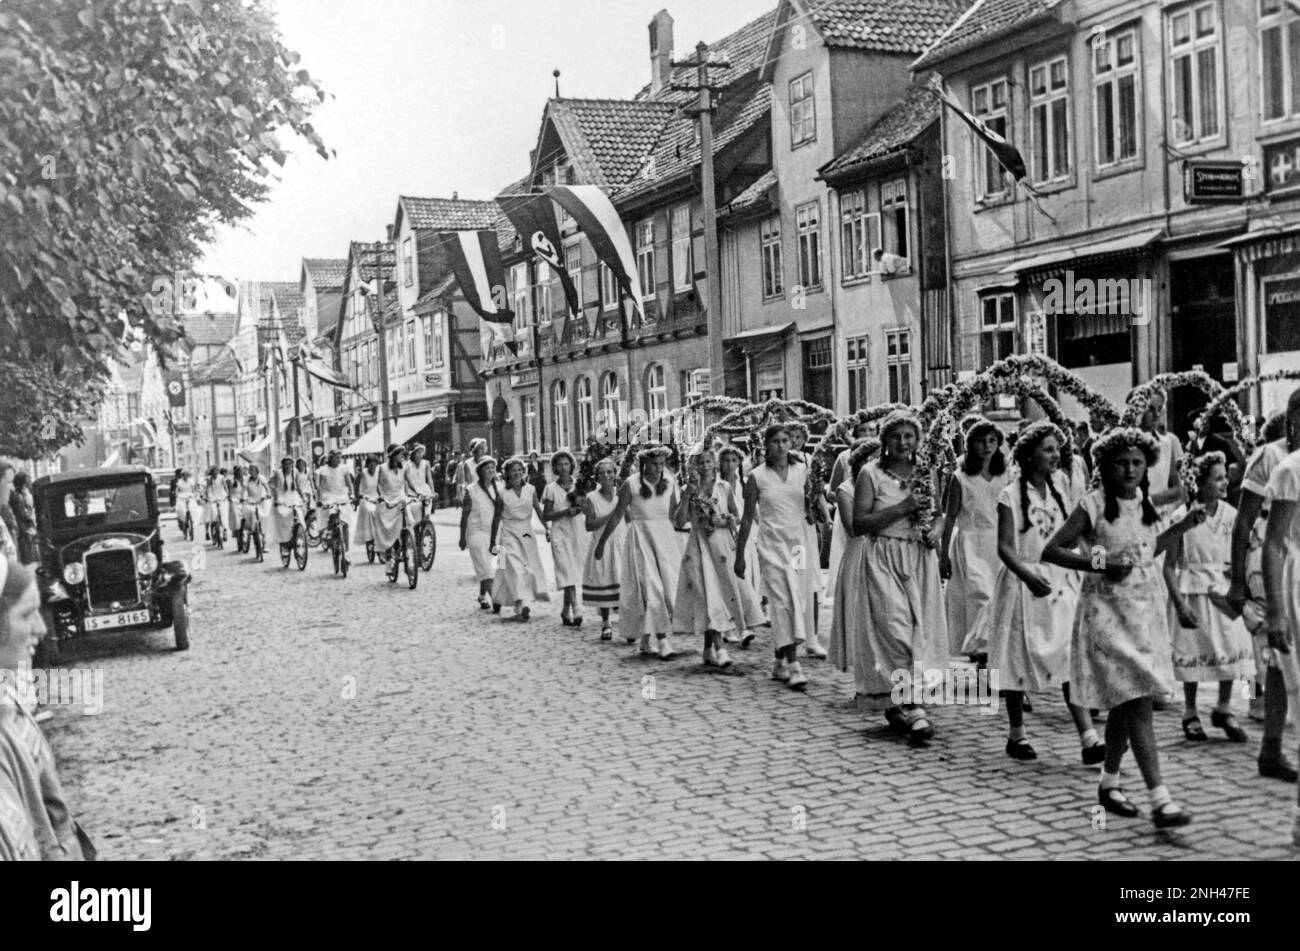 Young girls taking part in a parade, Lower Saxony, Germany, about 1935 Stock Photo